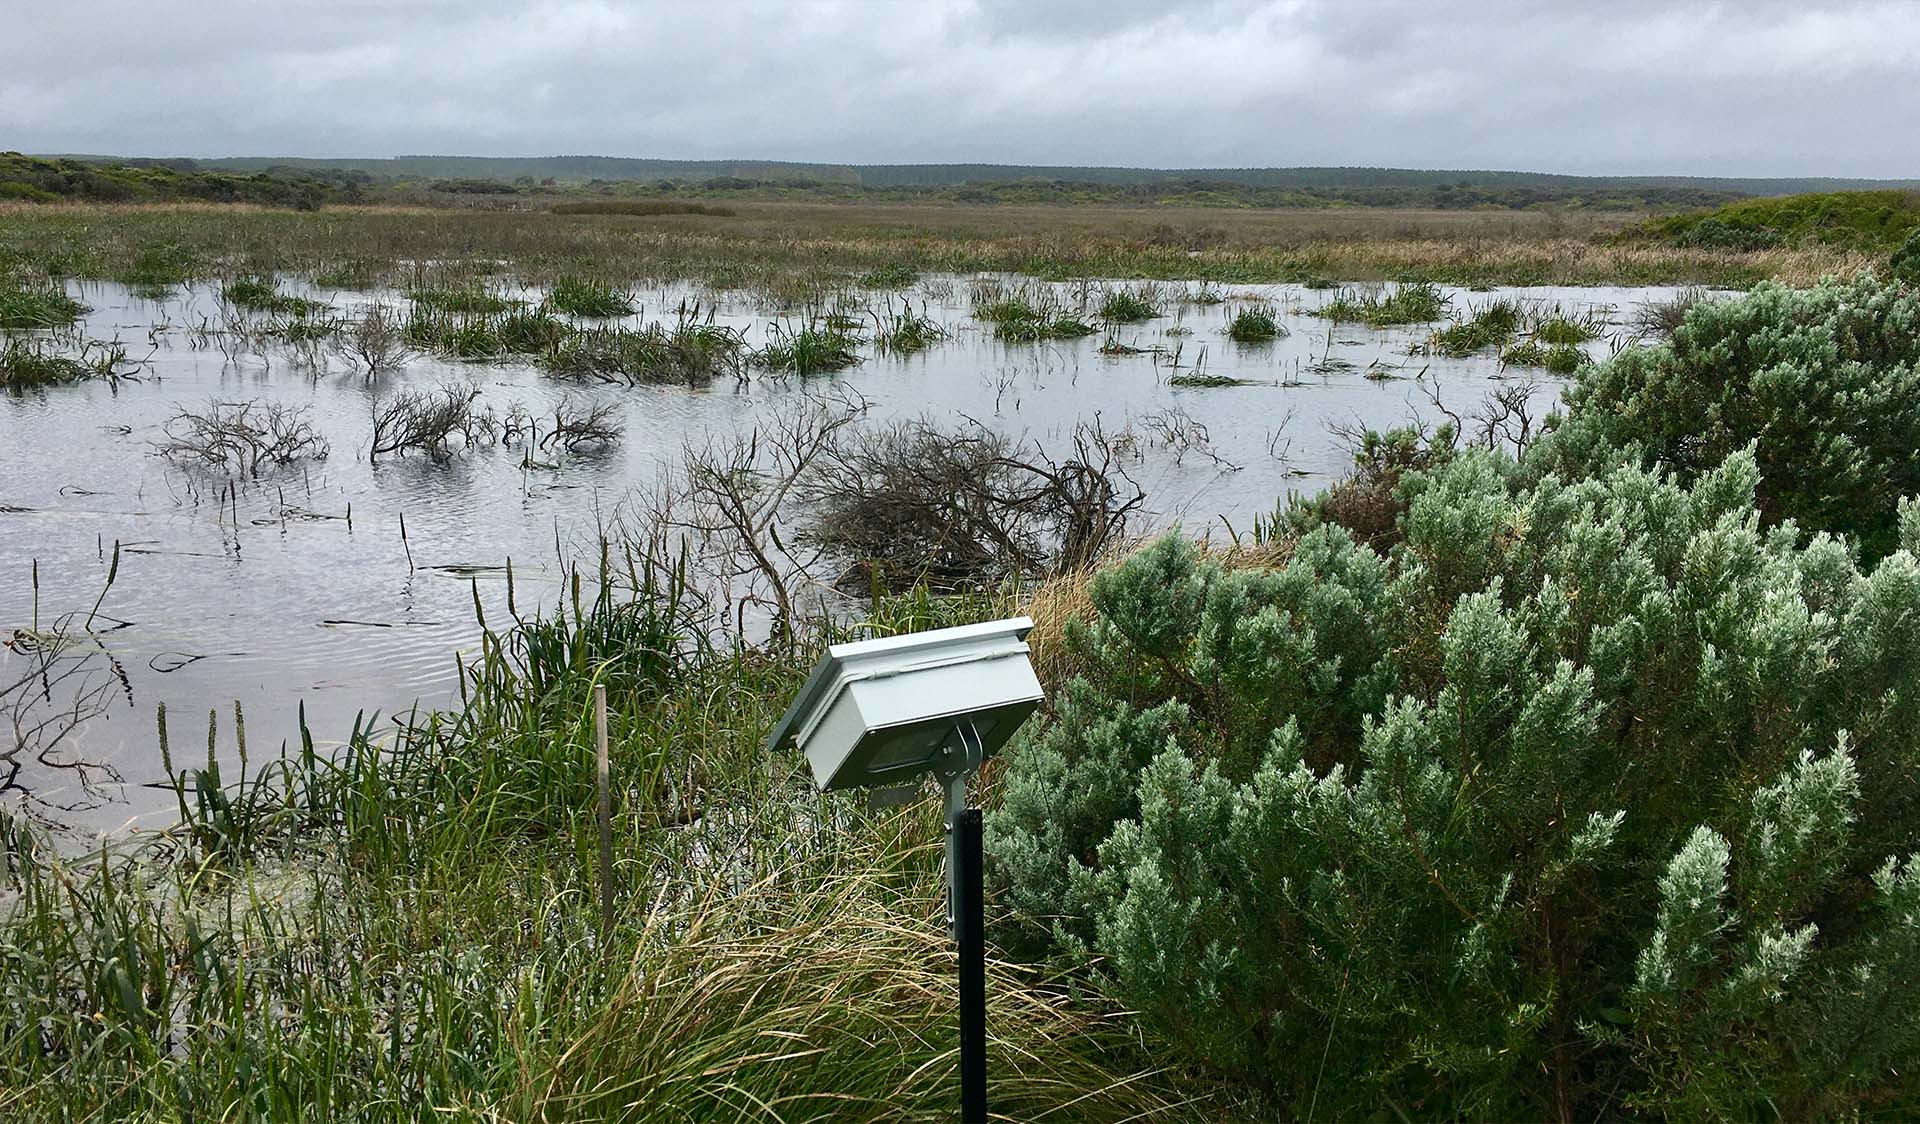 A piece of bird monitoring equipment faces the sky in a wetland landscape